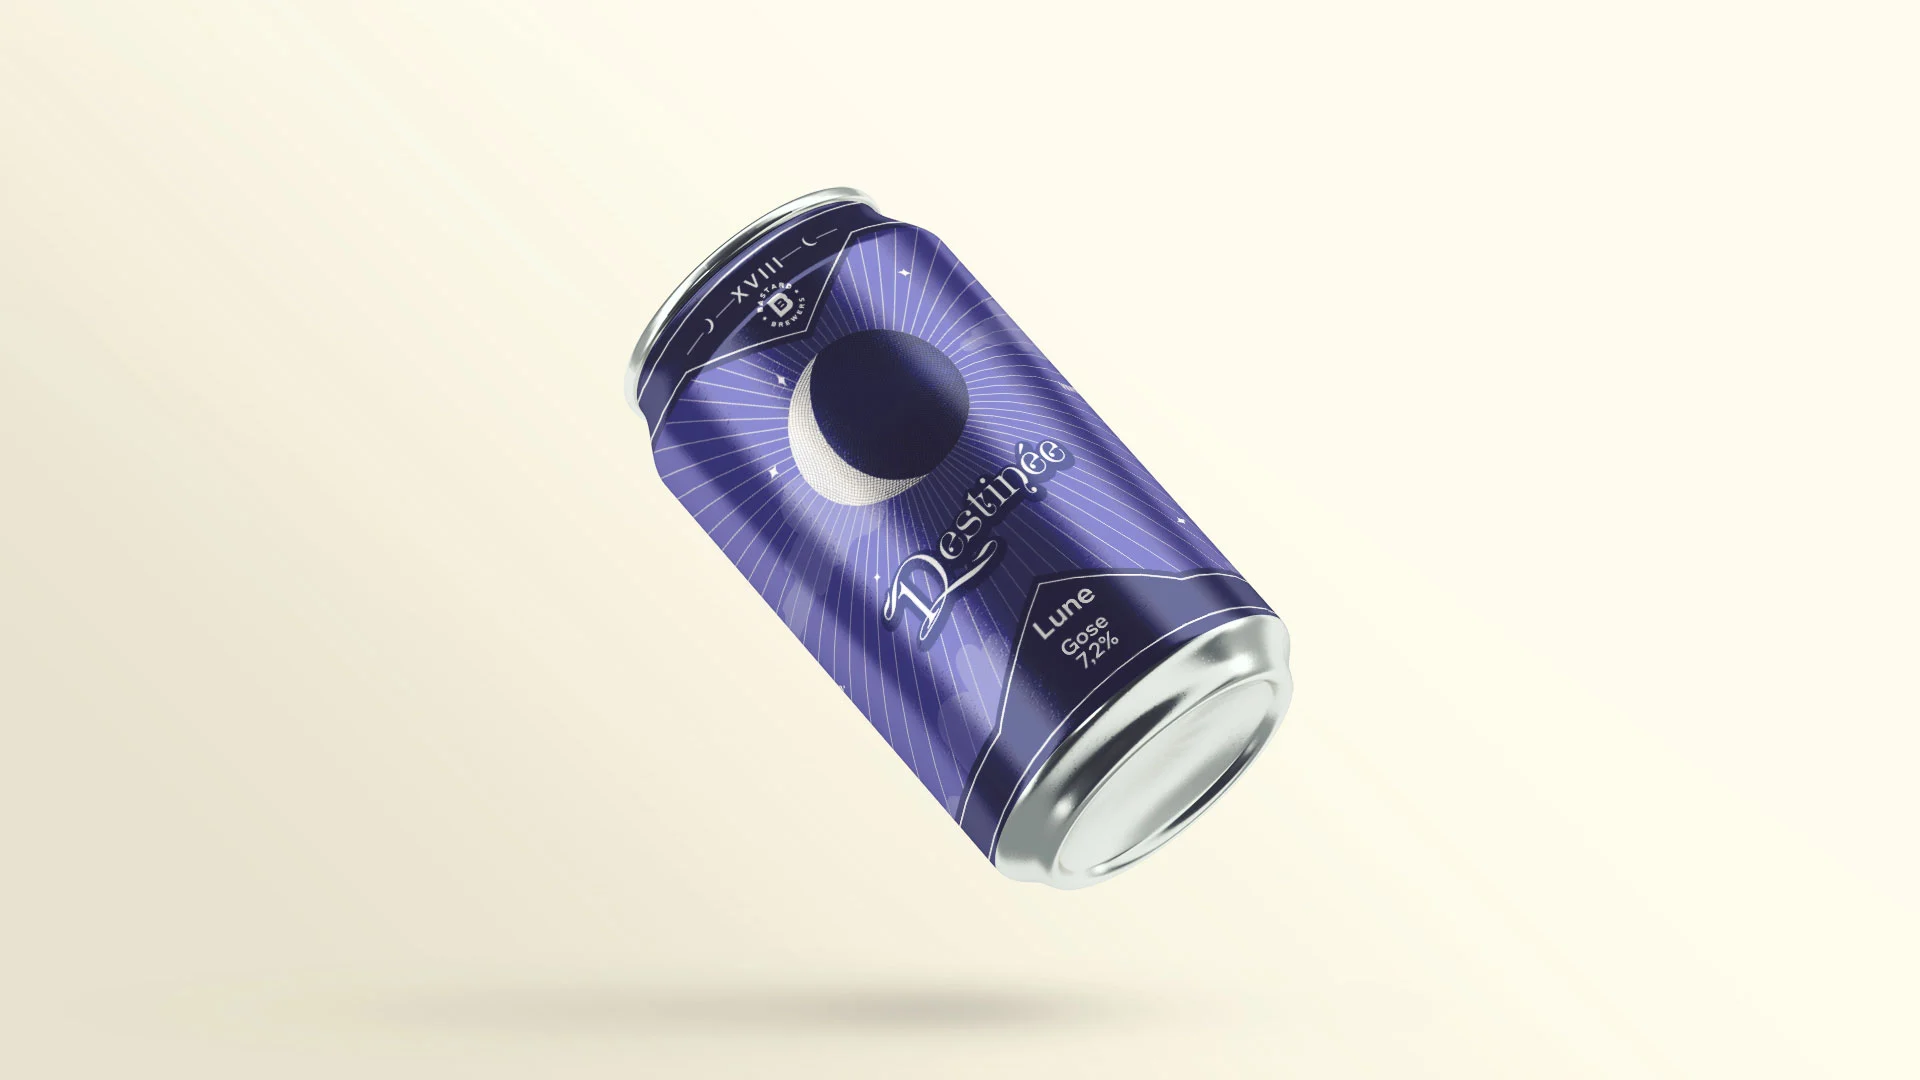 Render of a can design